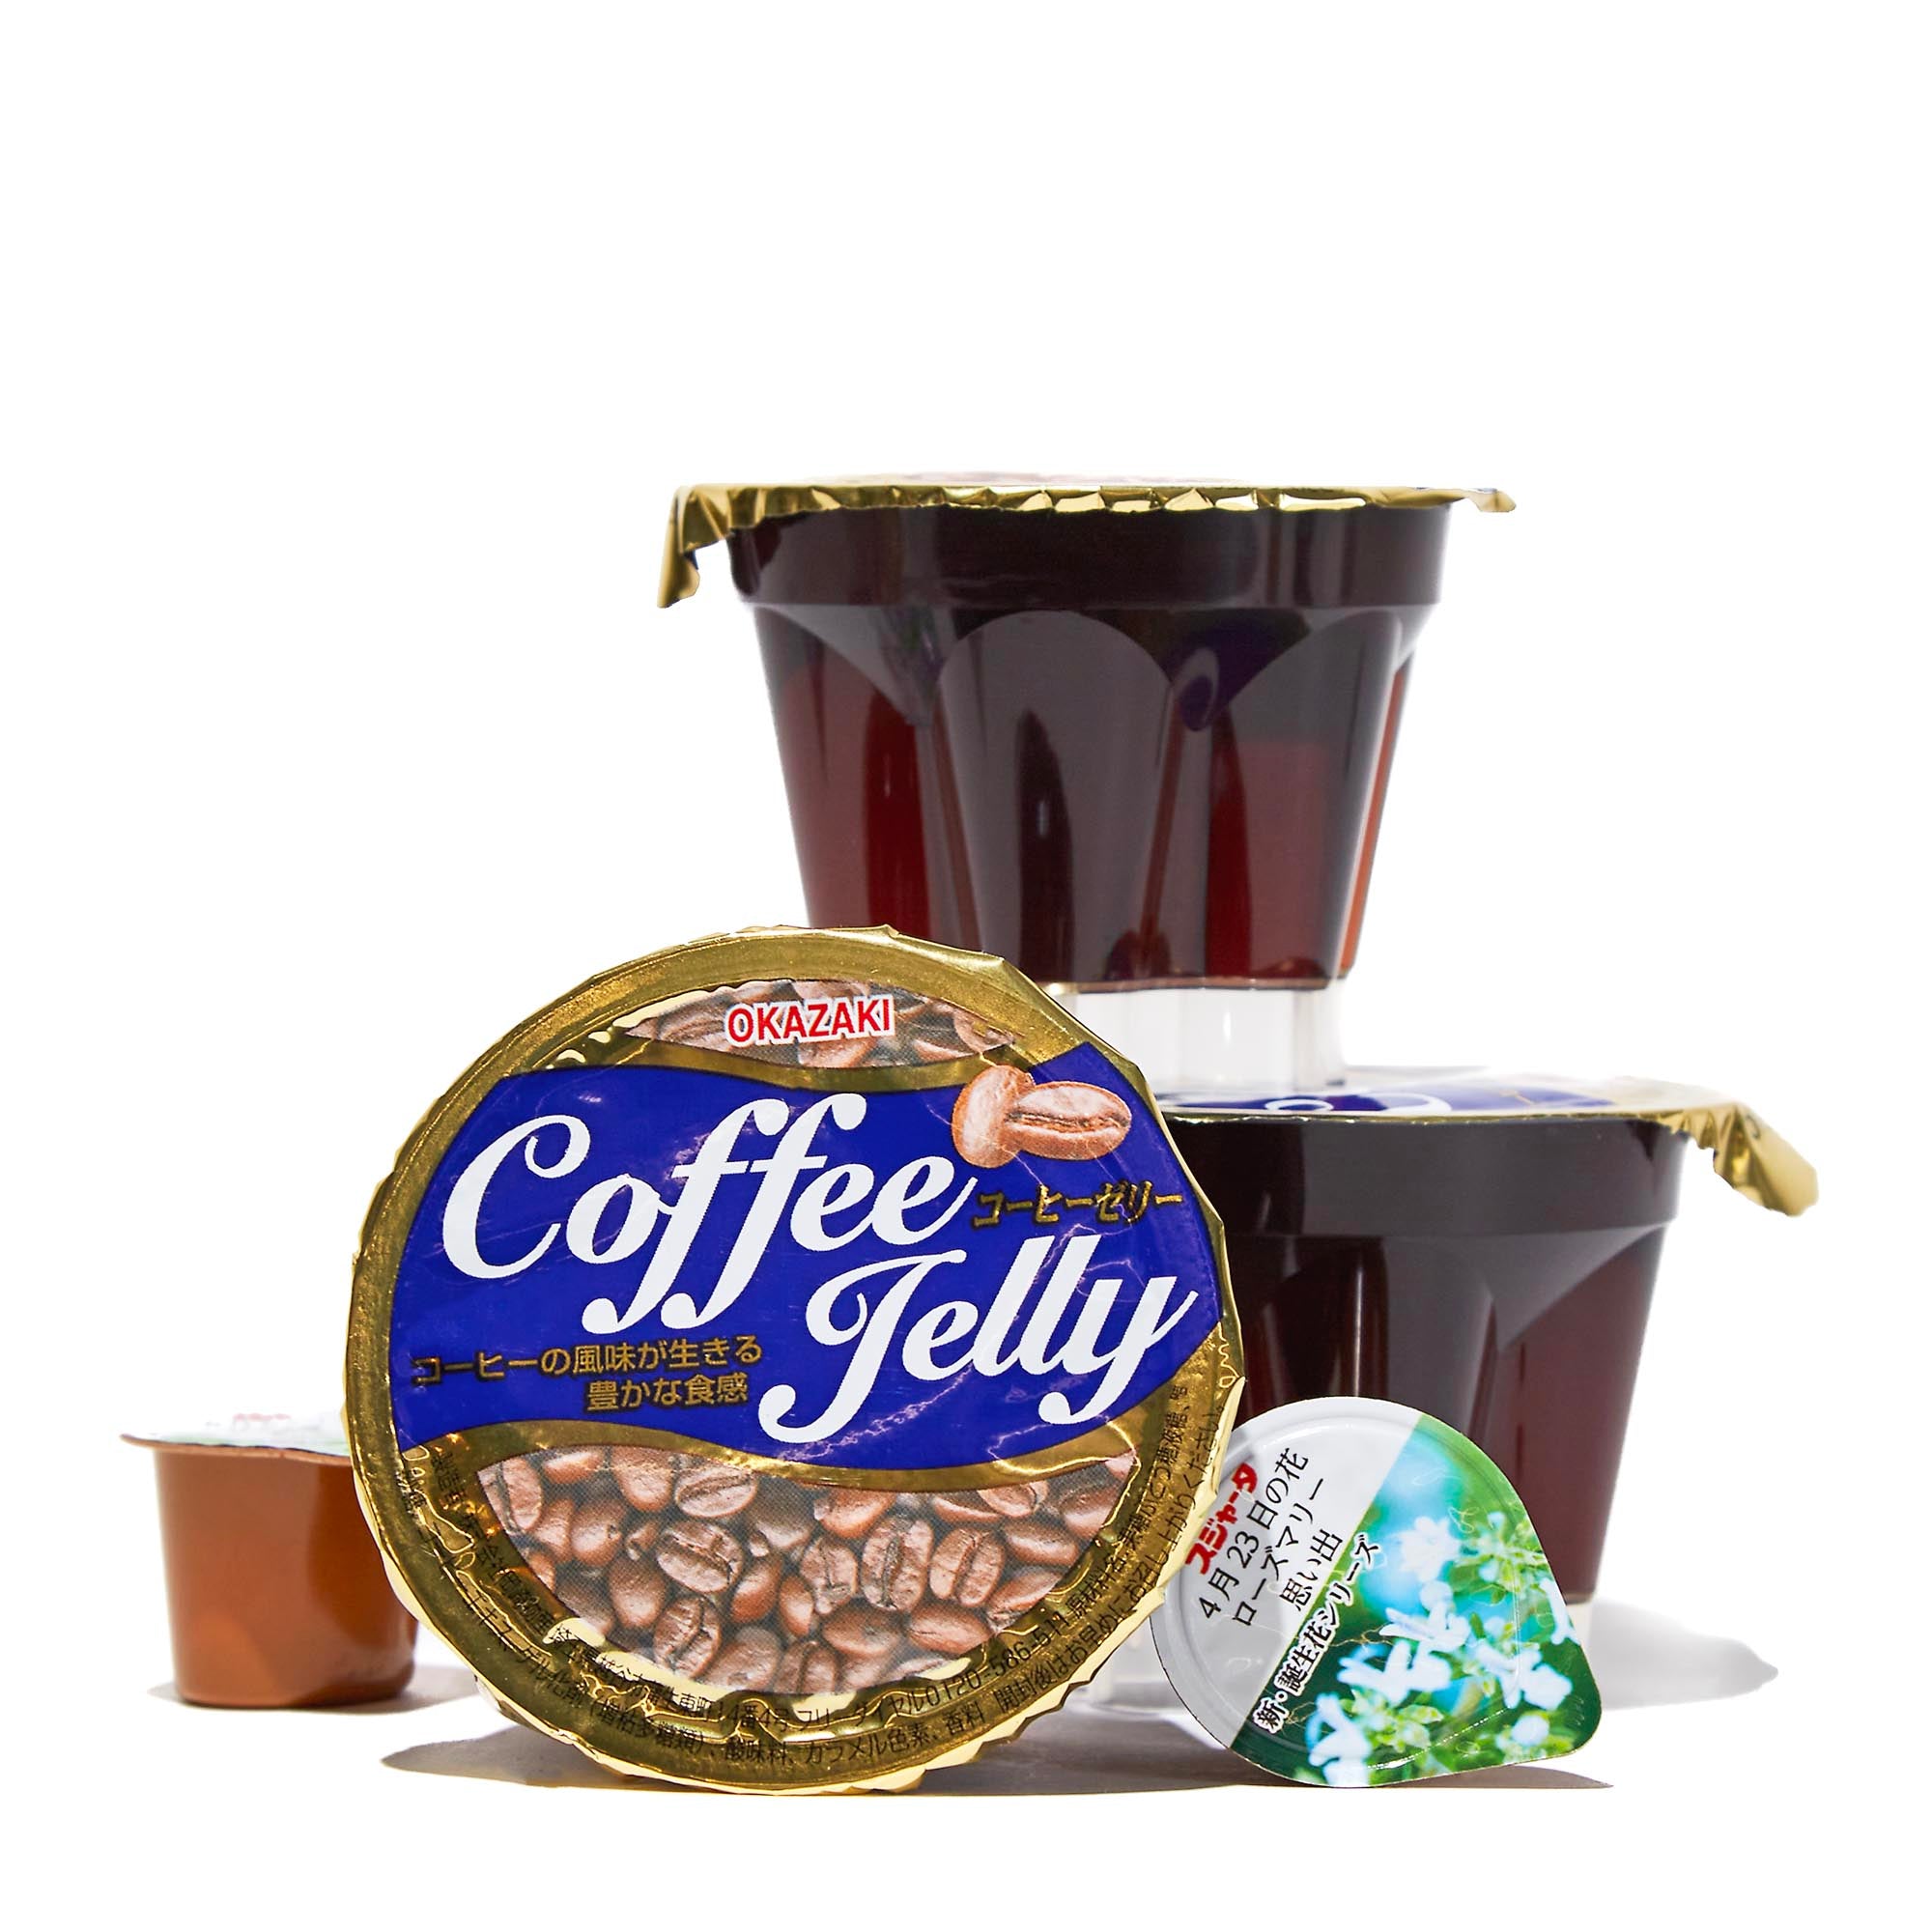 jelly for food brands